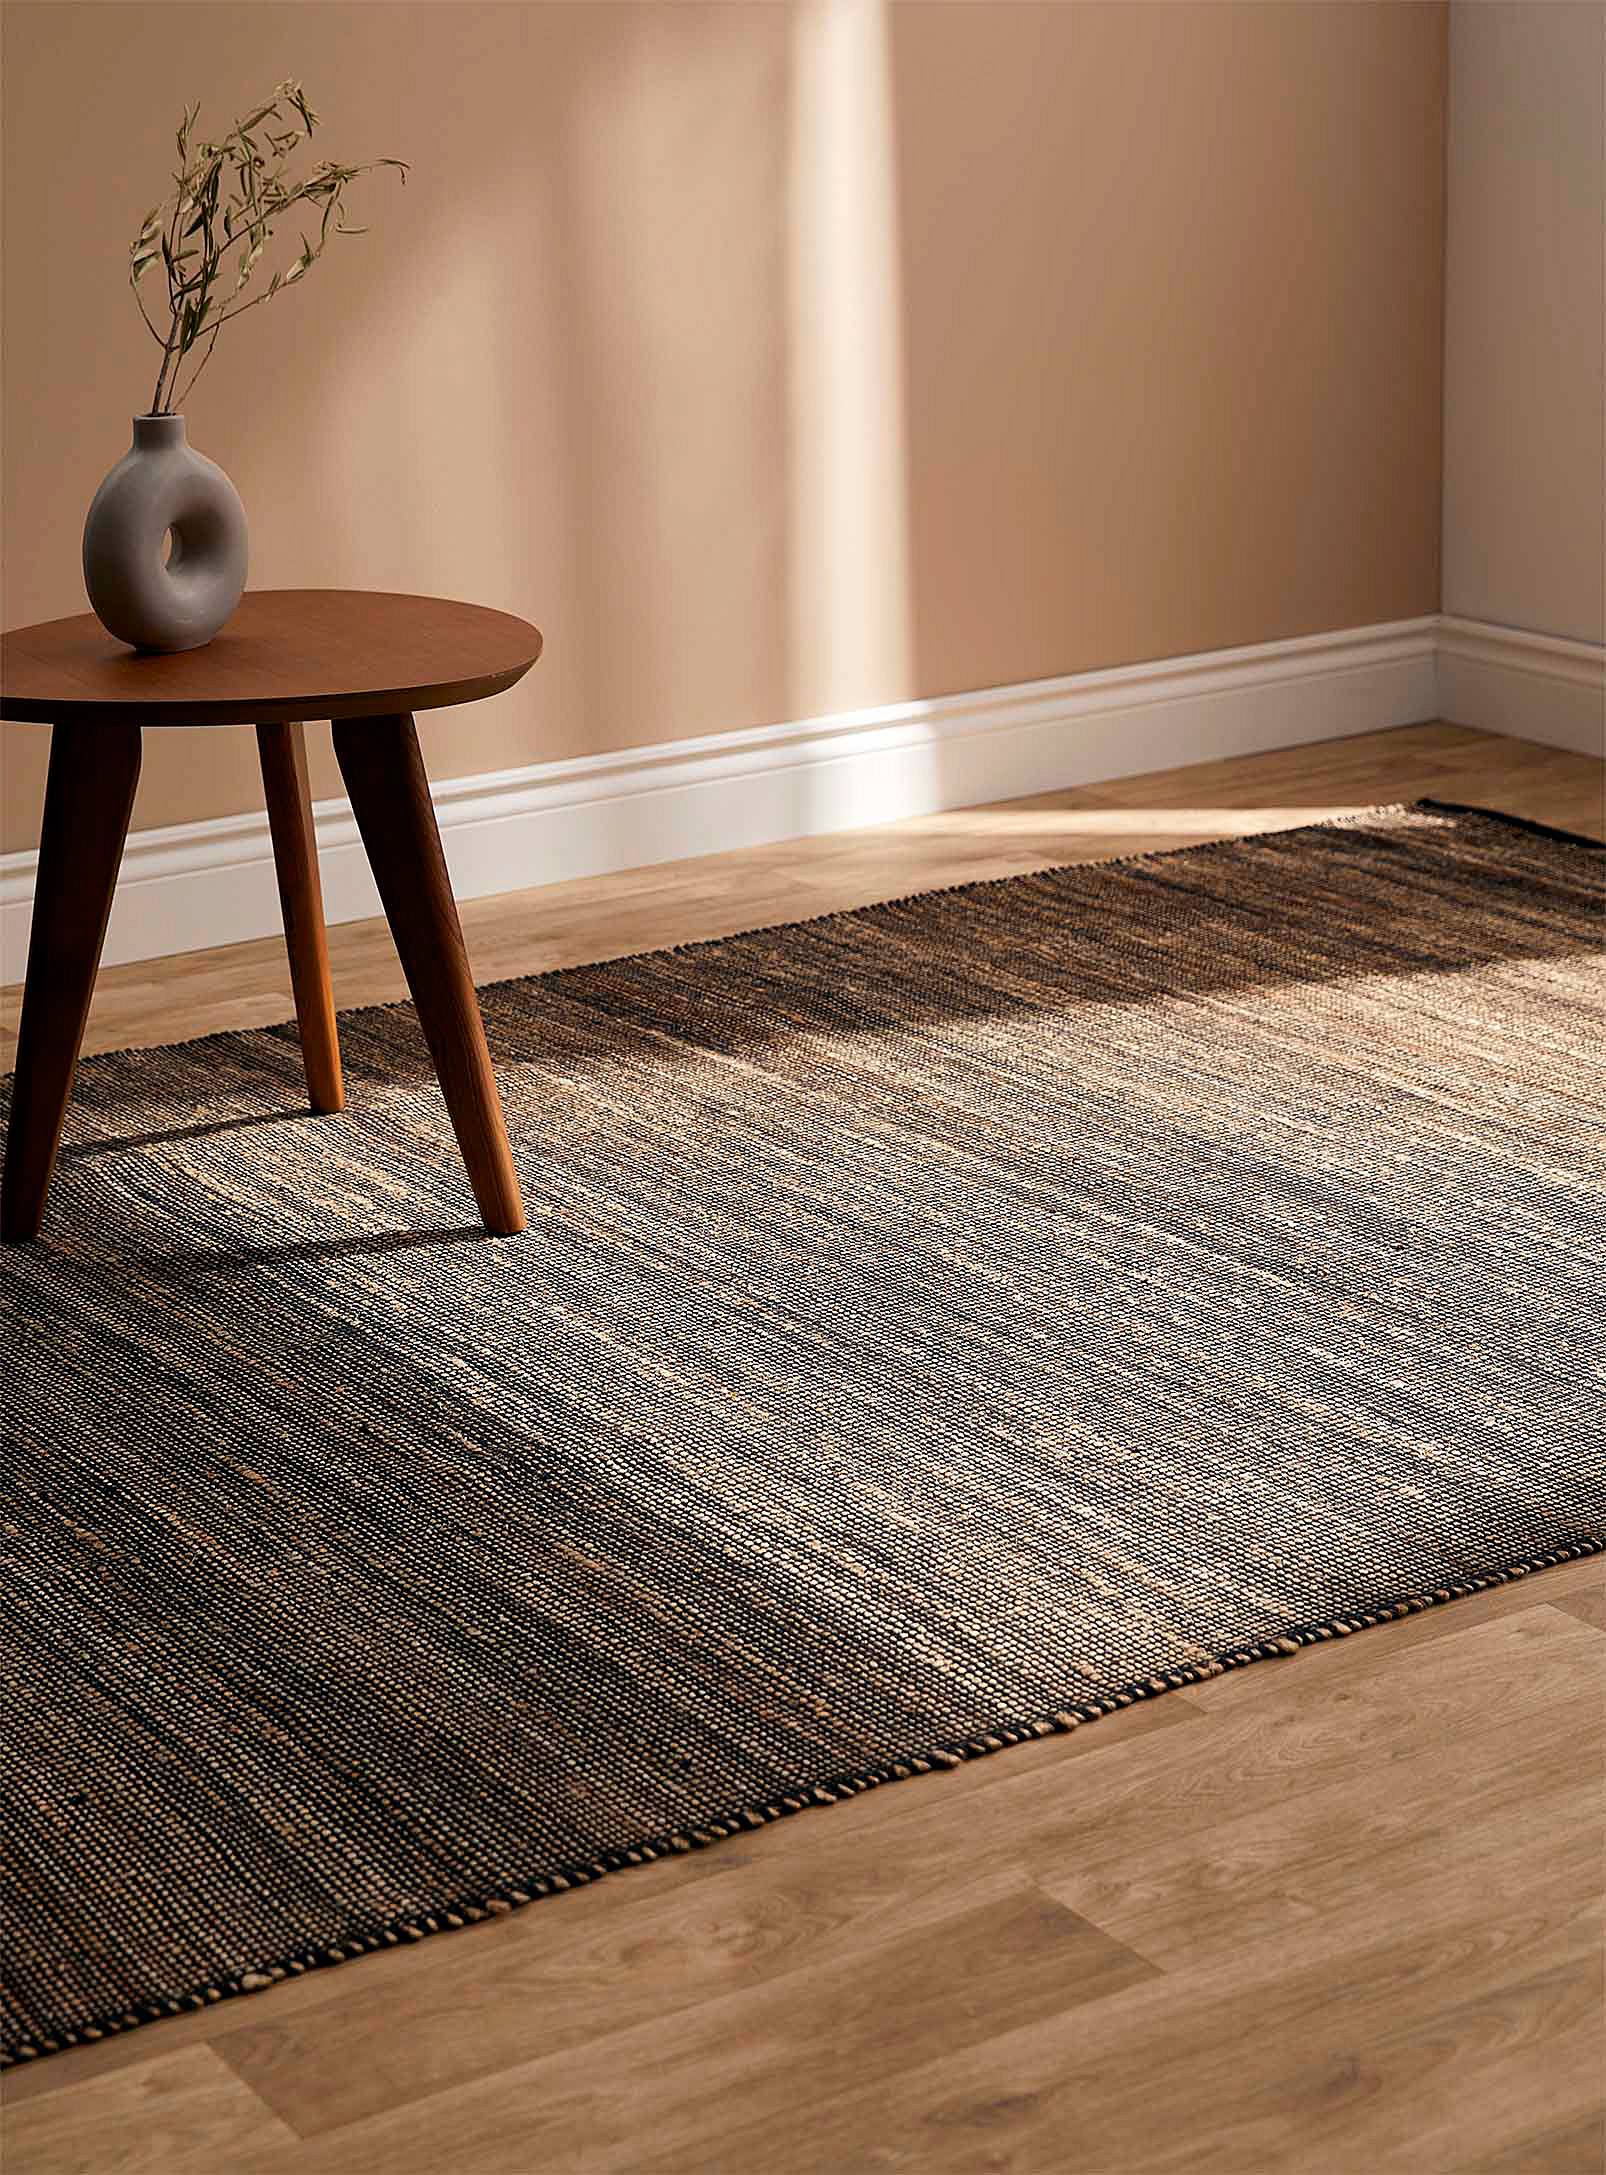 Simons Maison - Two-tone textured rug See available sizes